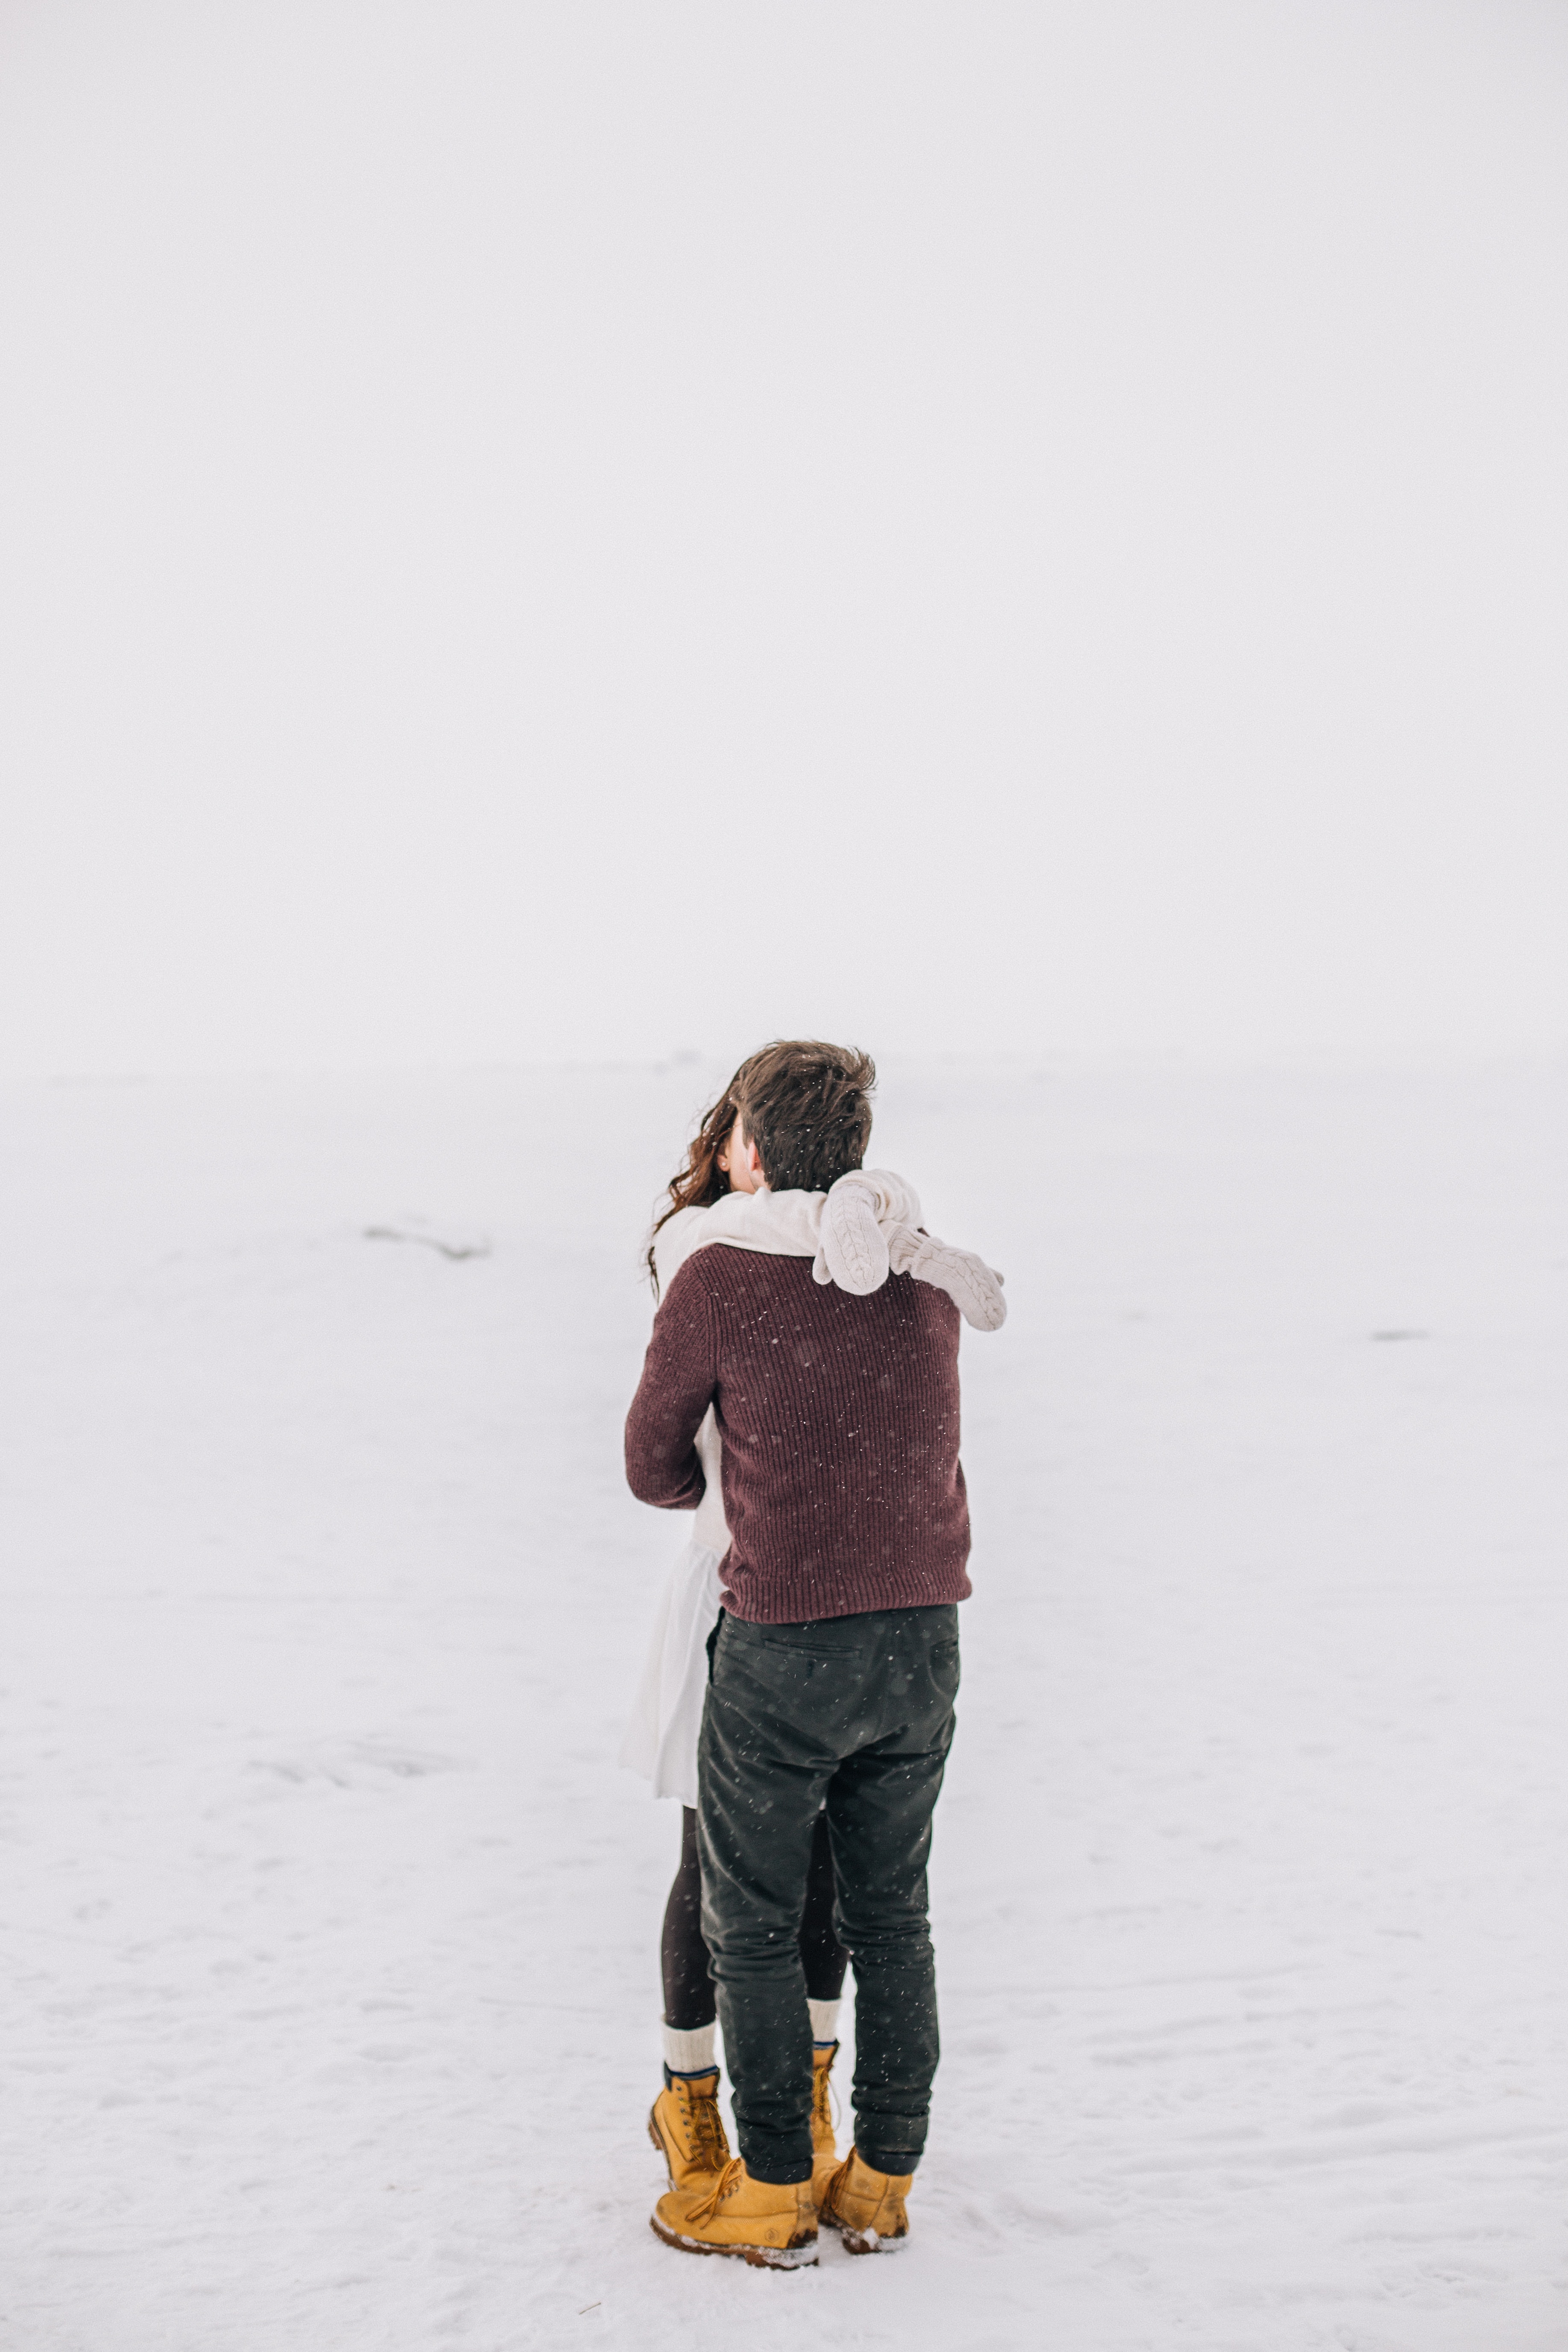 Man and woman kissing on snow field photo